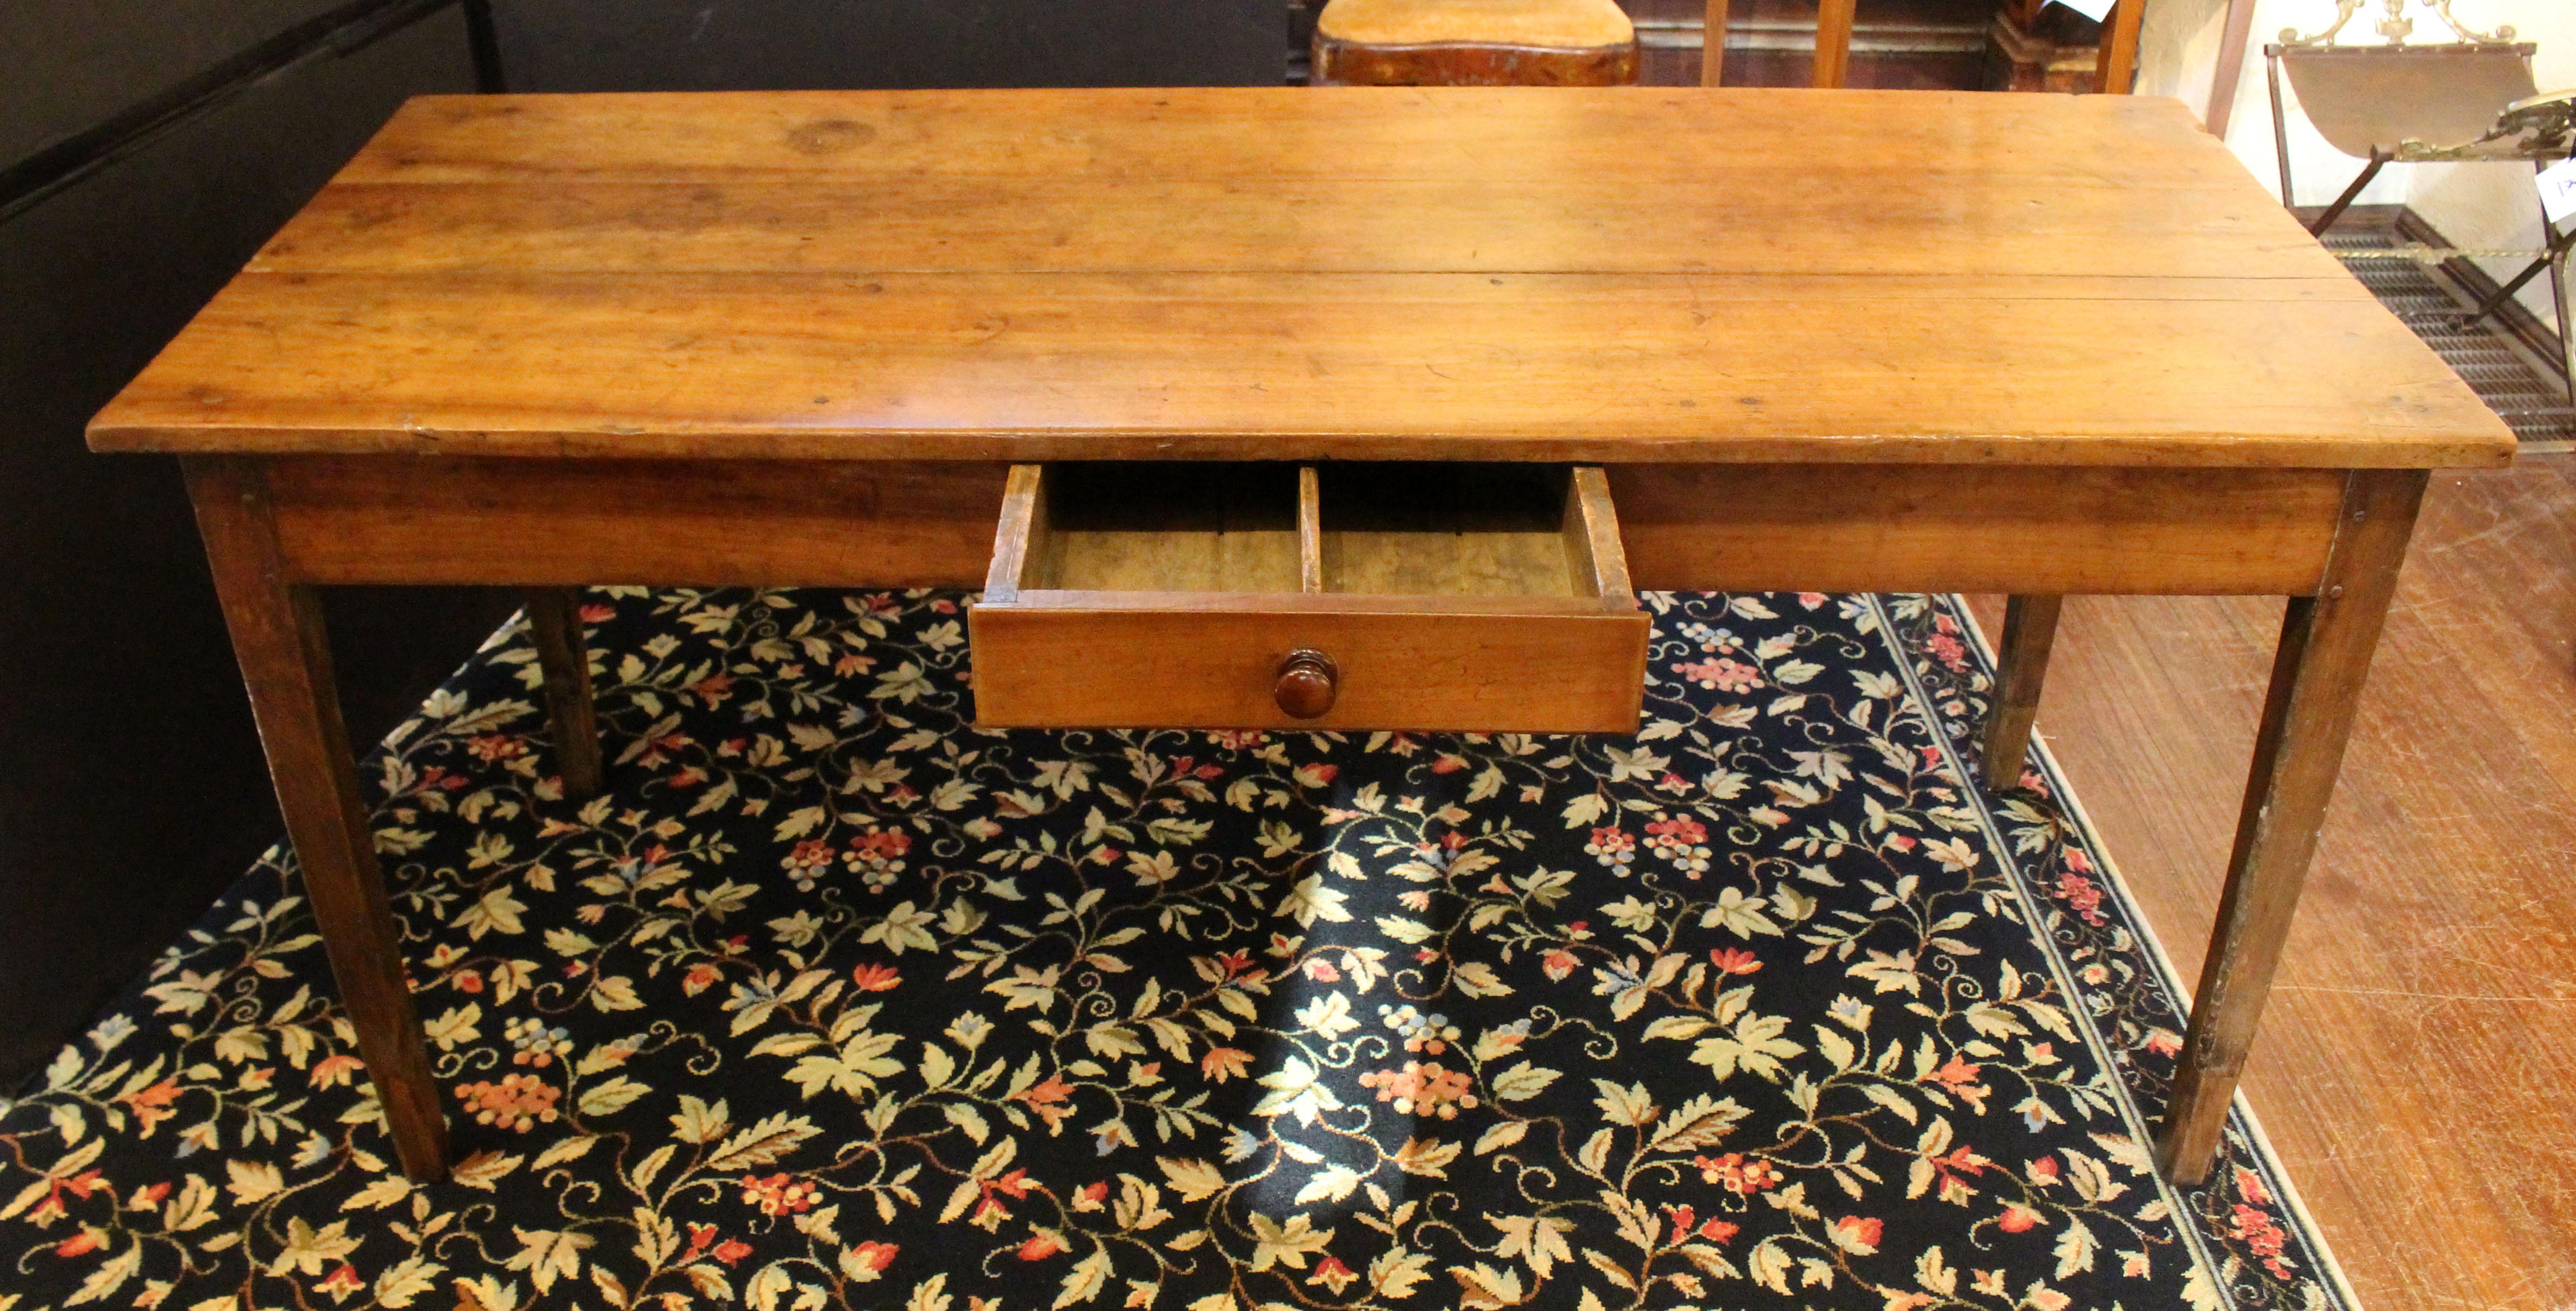 c. 1800 Country French Fruitwood Farm Table In Good Condition For Sale In Chapel Hill, NC